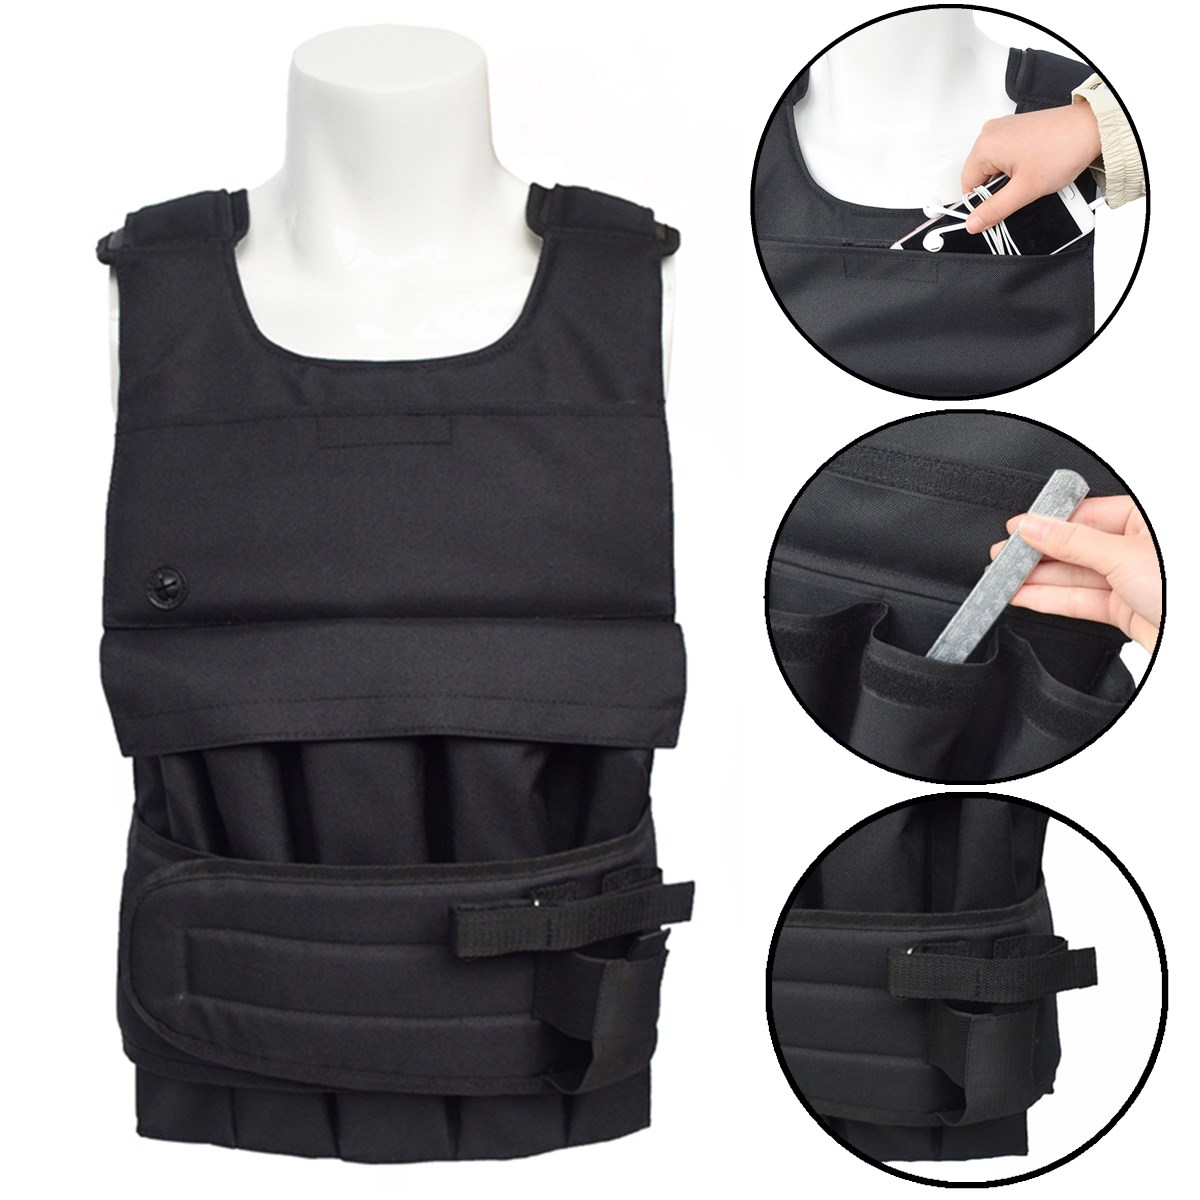 Adjustable-Weight-Vest-Outdoor-Training-Physical-Exercise-Slimming-Running-trainingWeight-Bearing-Wa-1695499-4